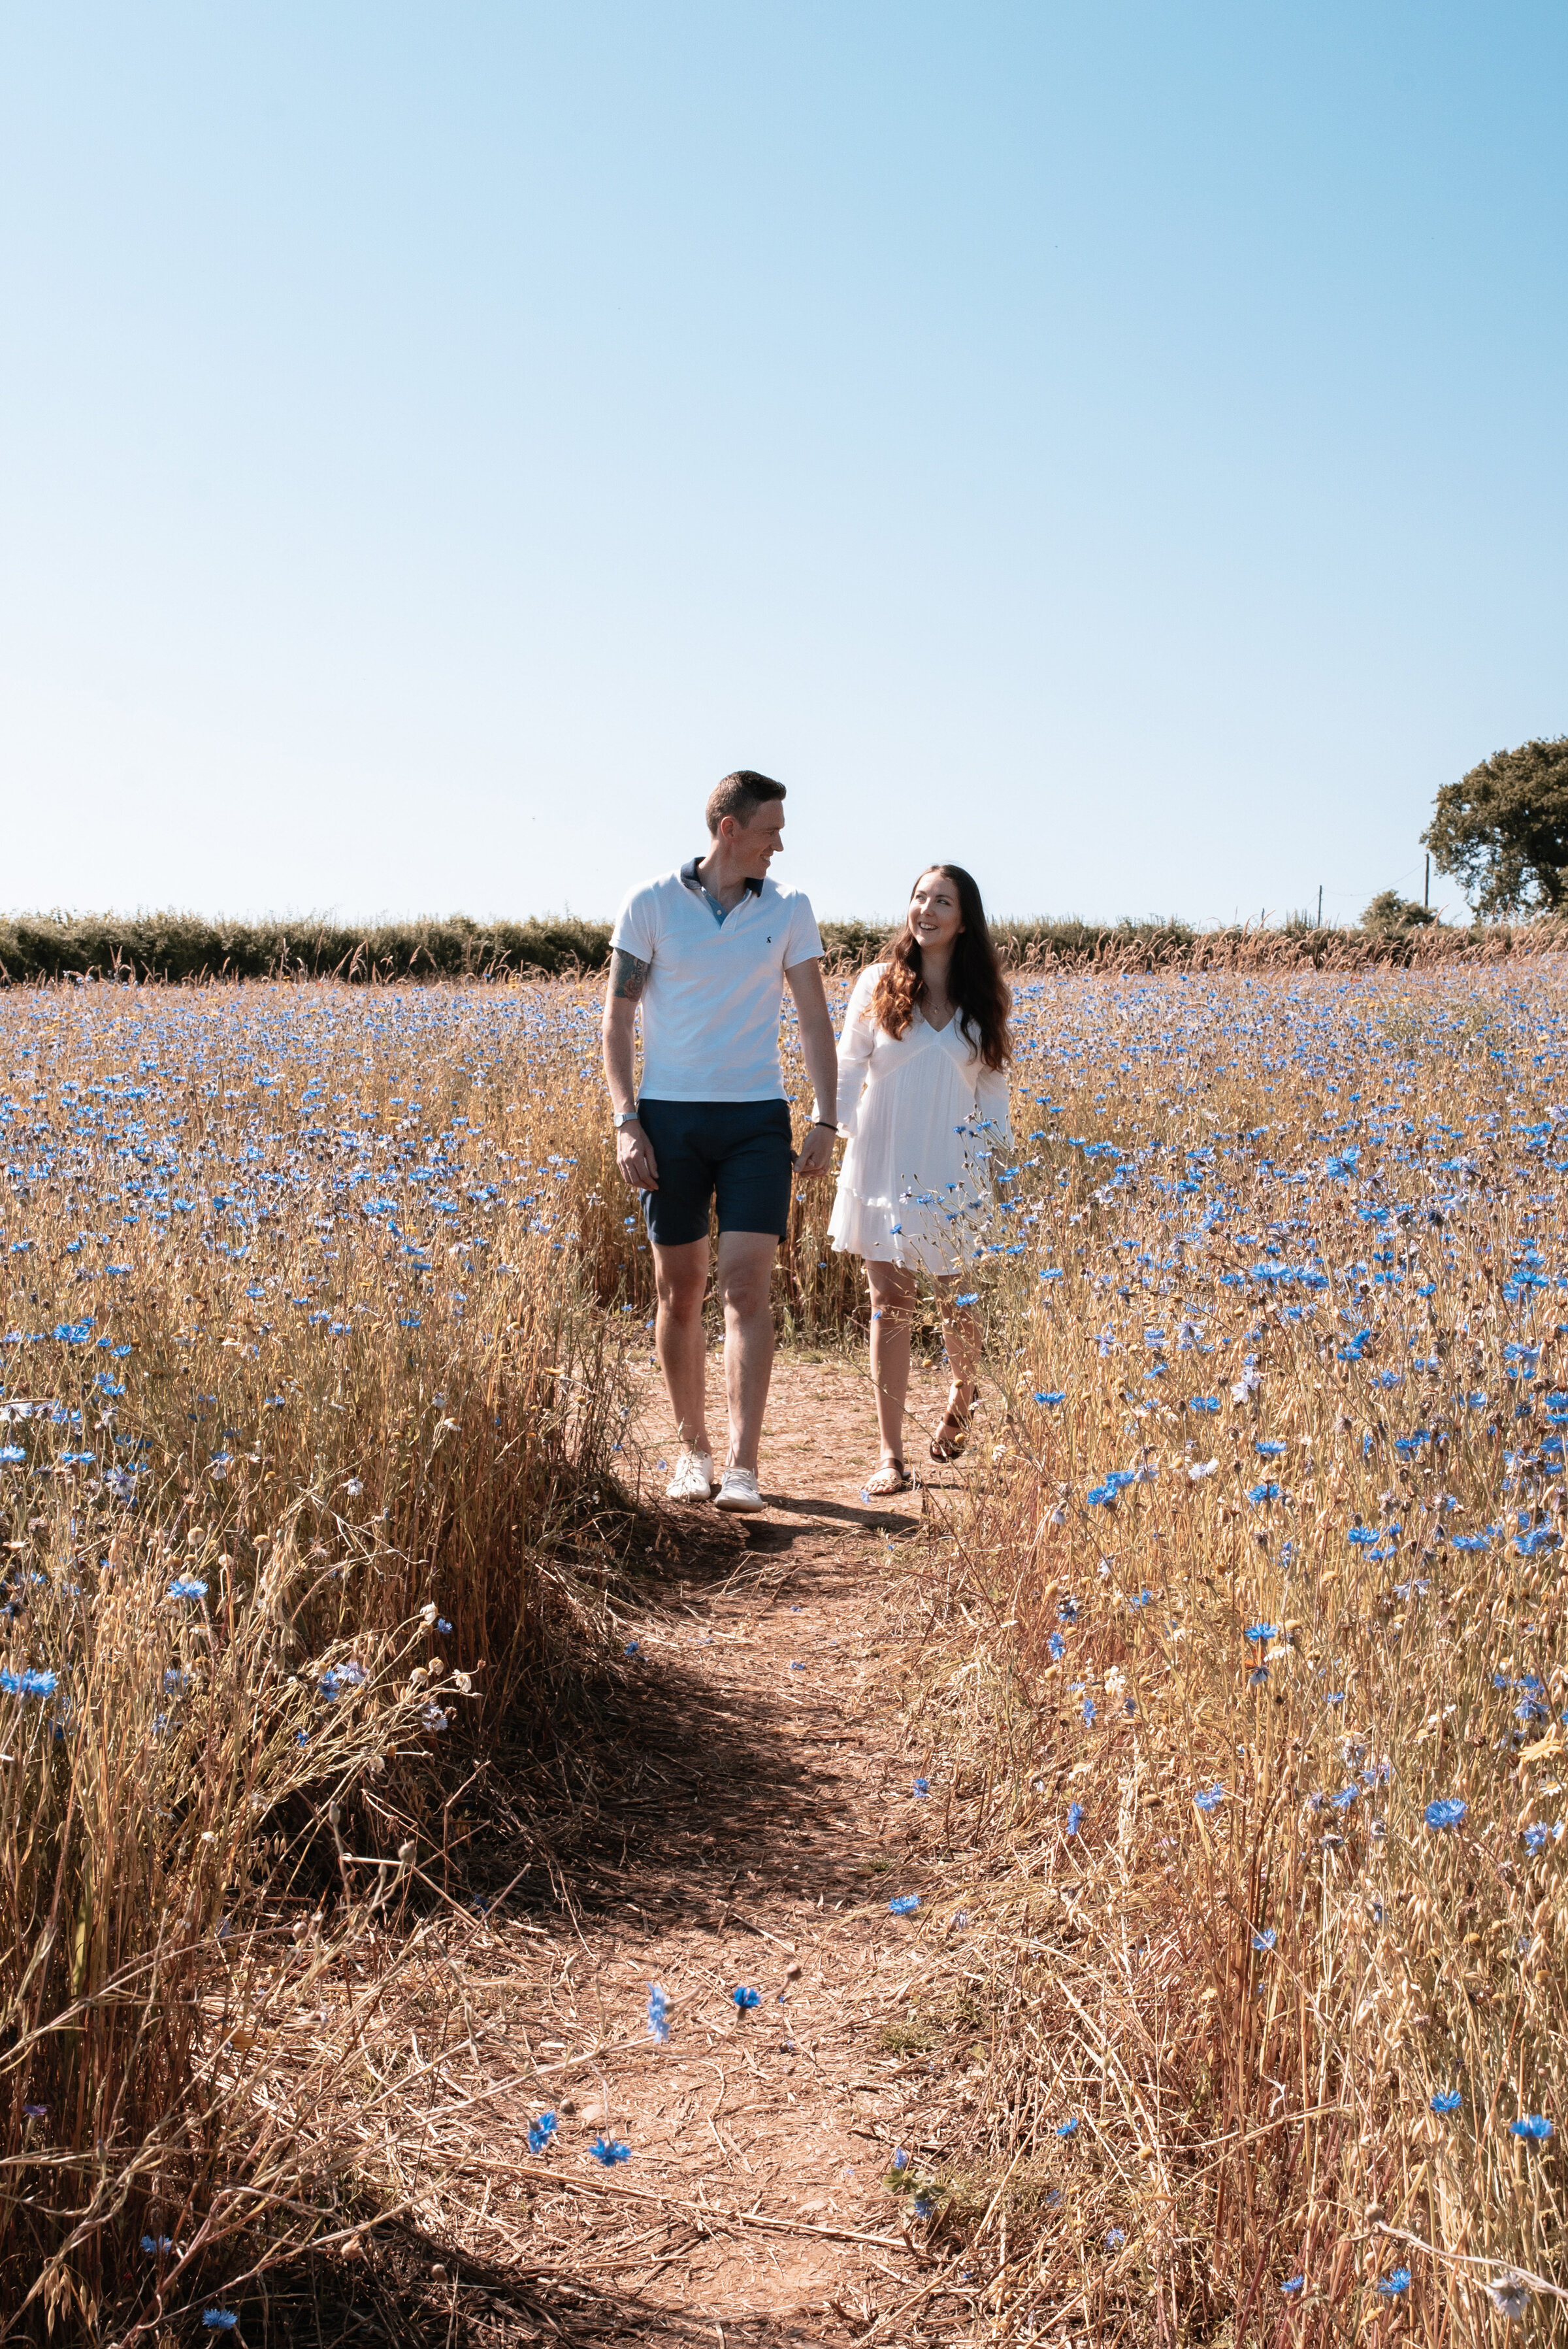 Man and woman laughing and walking hand in hand towards the camera surrounded by wildflowers